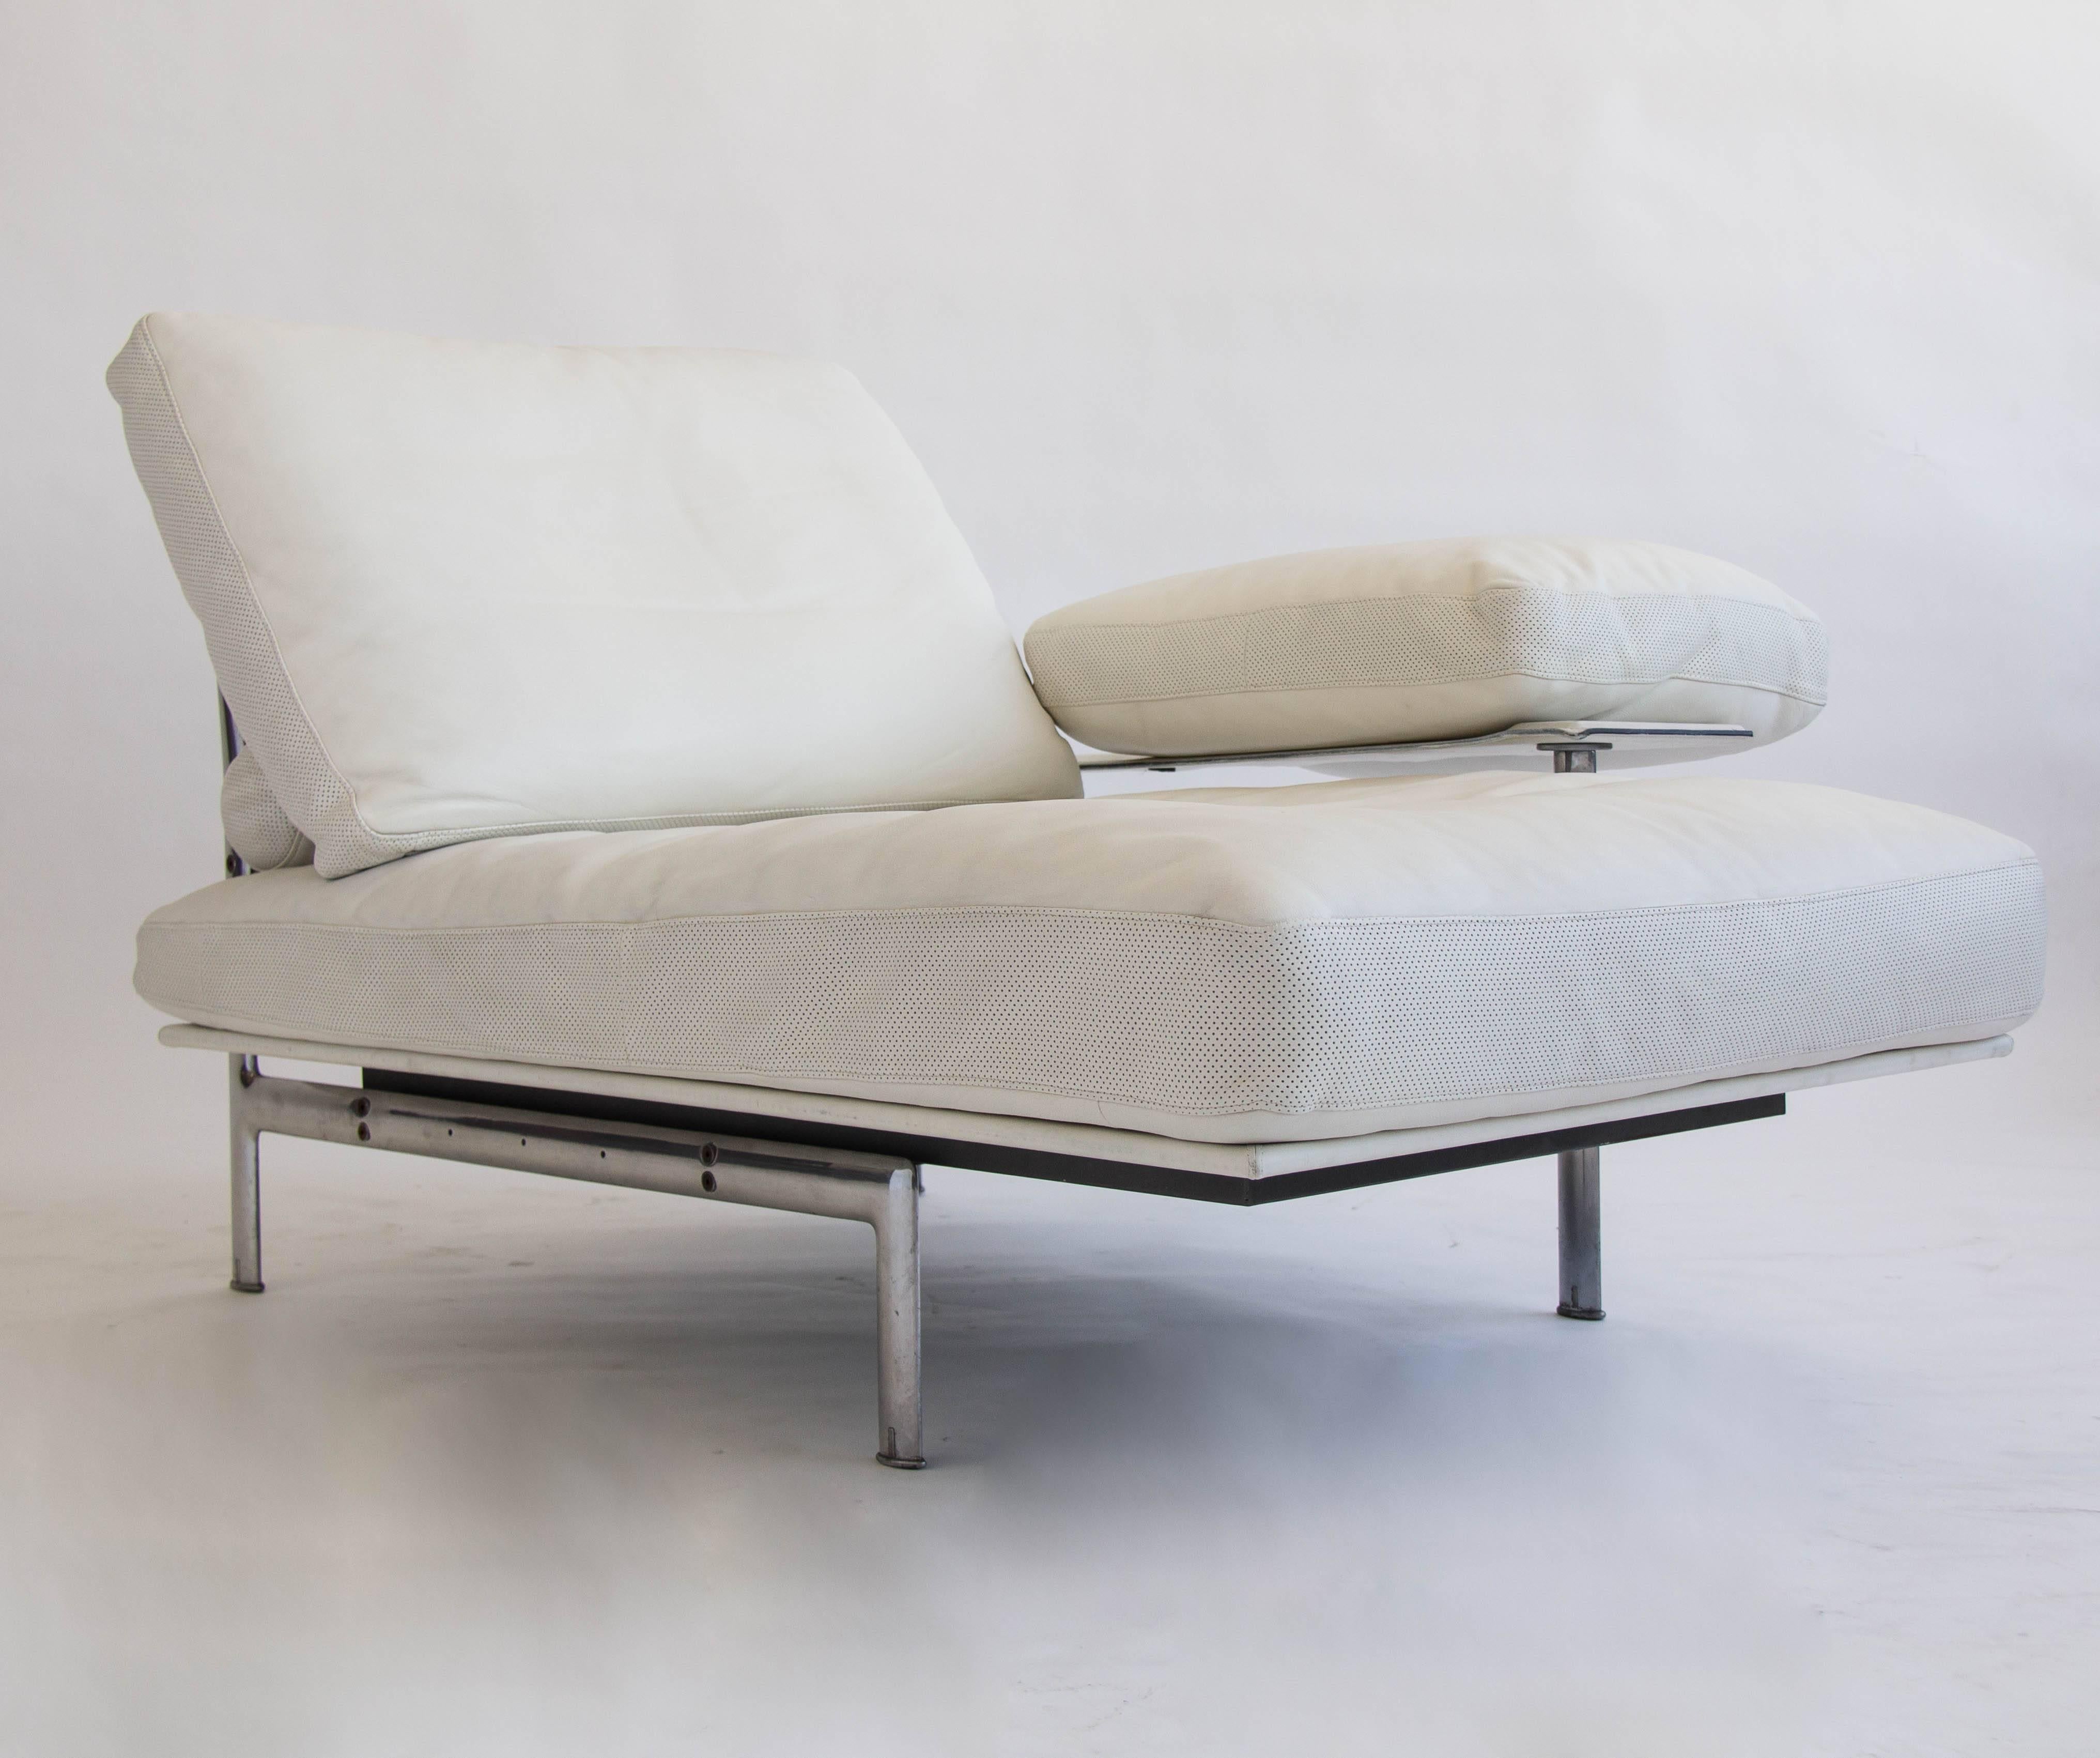 Classic design by Antonio Citterio for B&B Italia in 1979. Each piece has a brushed aluminum frame and feet. The white leather cushions and support pillows have been professionally restored, and all cushions are trimmed with a detail in matching